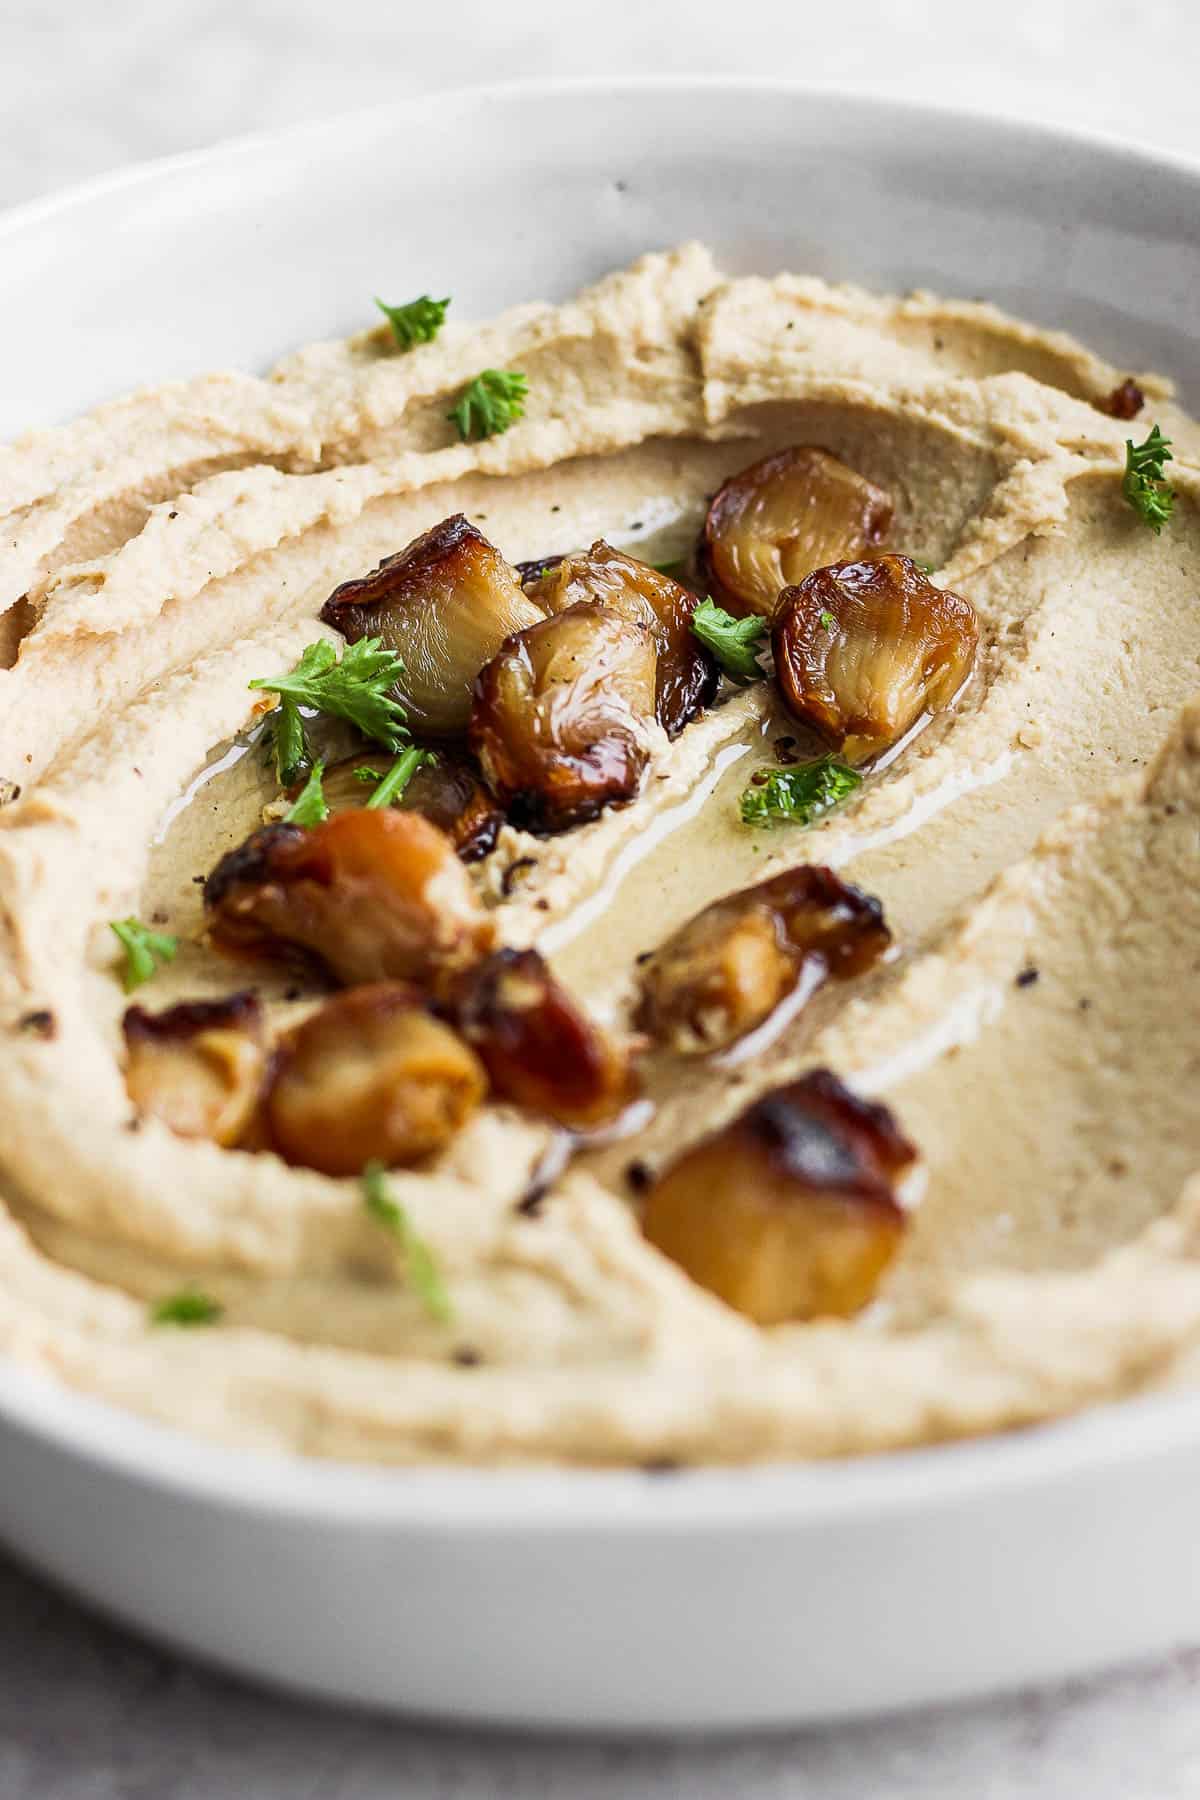 A layer of hummus smoothed out on the bottom of a bowl topped with a few roasted garlic cloves and freshly chopped parsley.